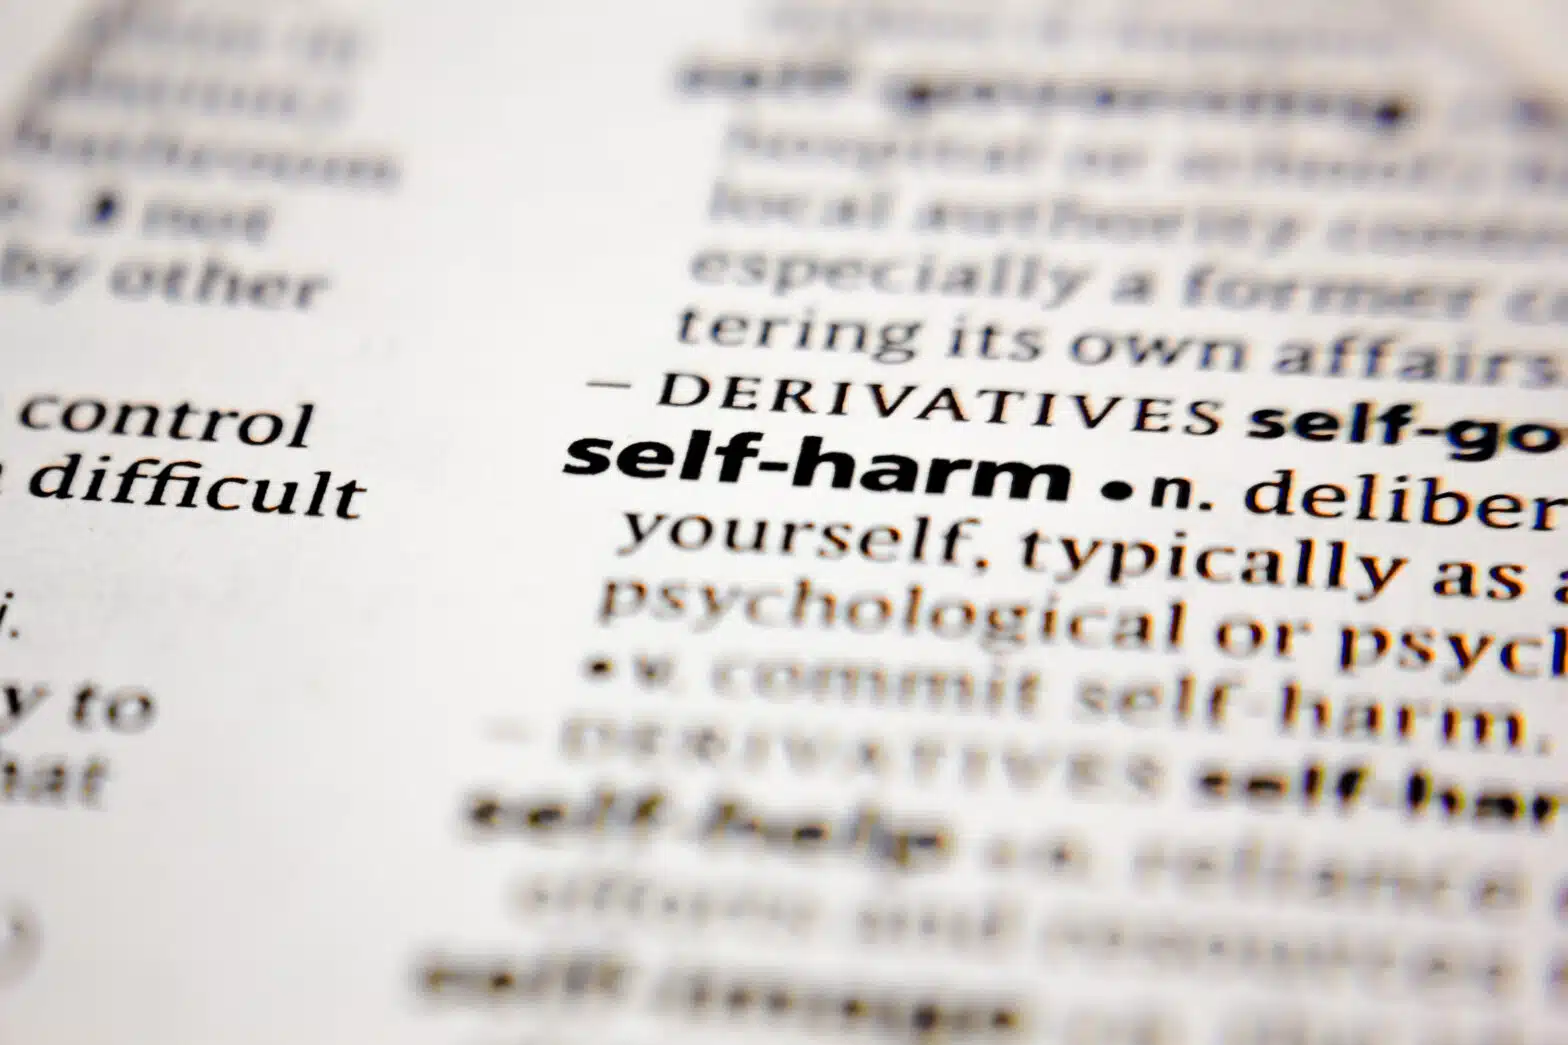 A dictionary page. The words "Self-harm" are visible, but the rest of the page is blurry - Self-Harm (Nonsuicidal Self-Injury Disorder) Overview & Treatment